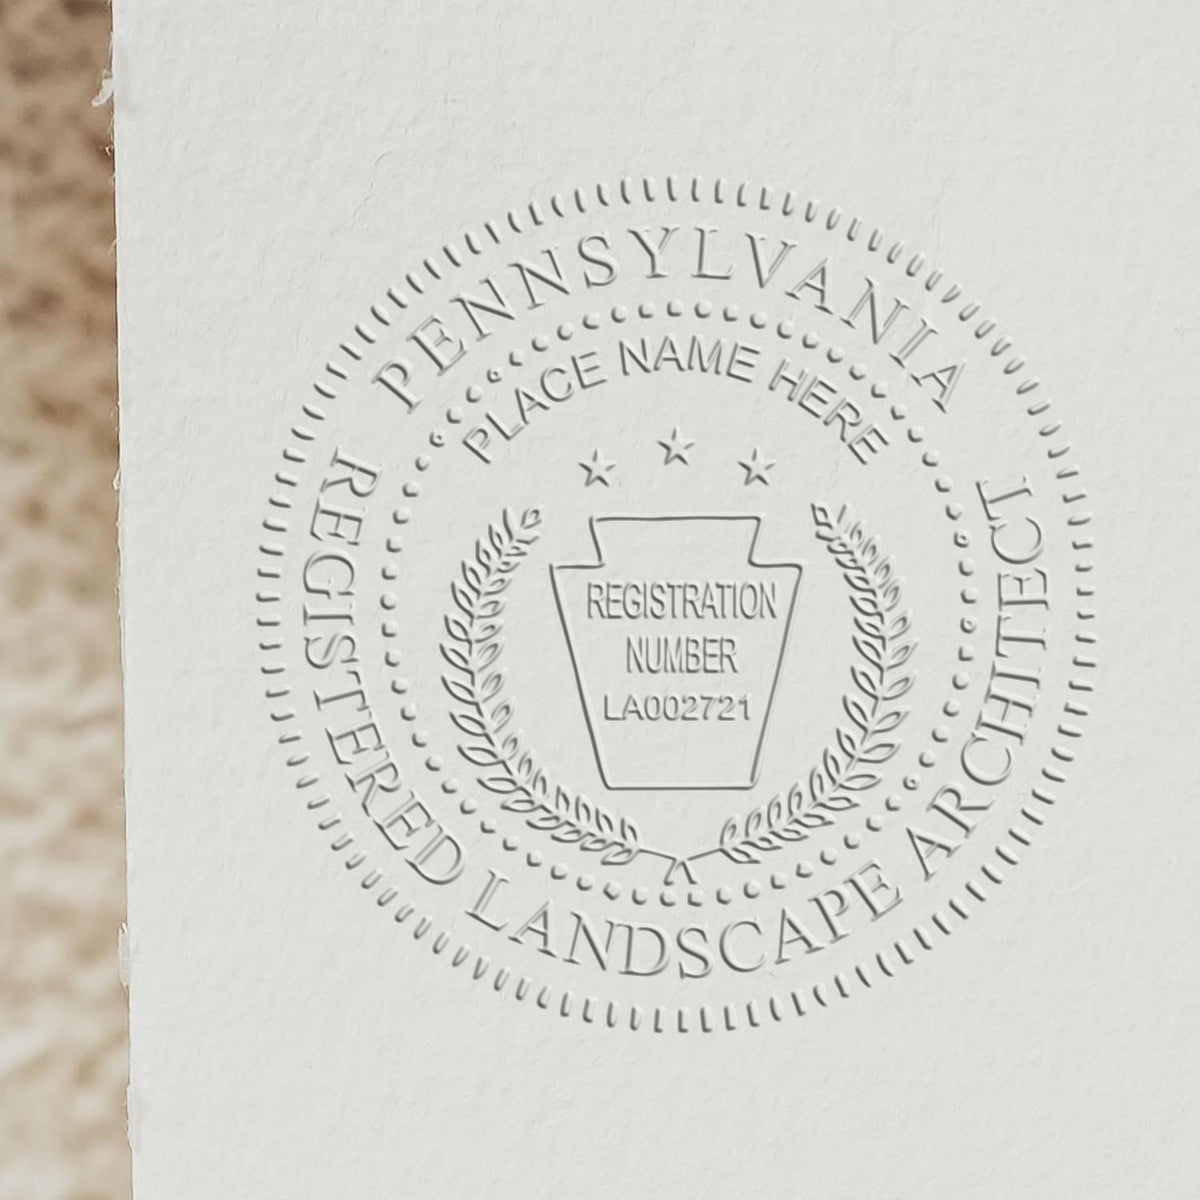 The Soft Pocket Pennsylvania Landscape Architect Embosser stamp impression comes to life with a crisp, detailed photo on paper - showcasing true professional quality.